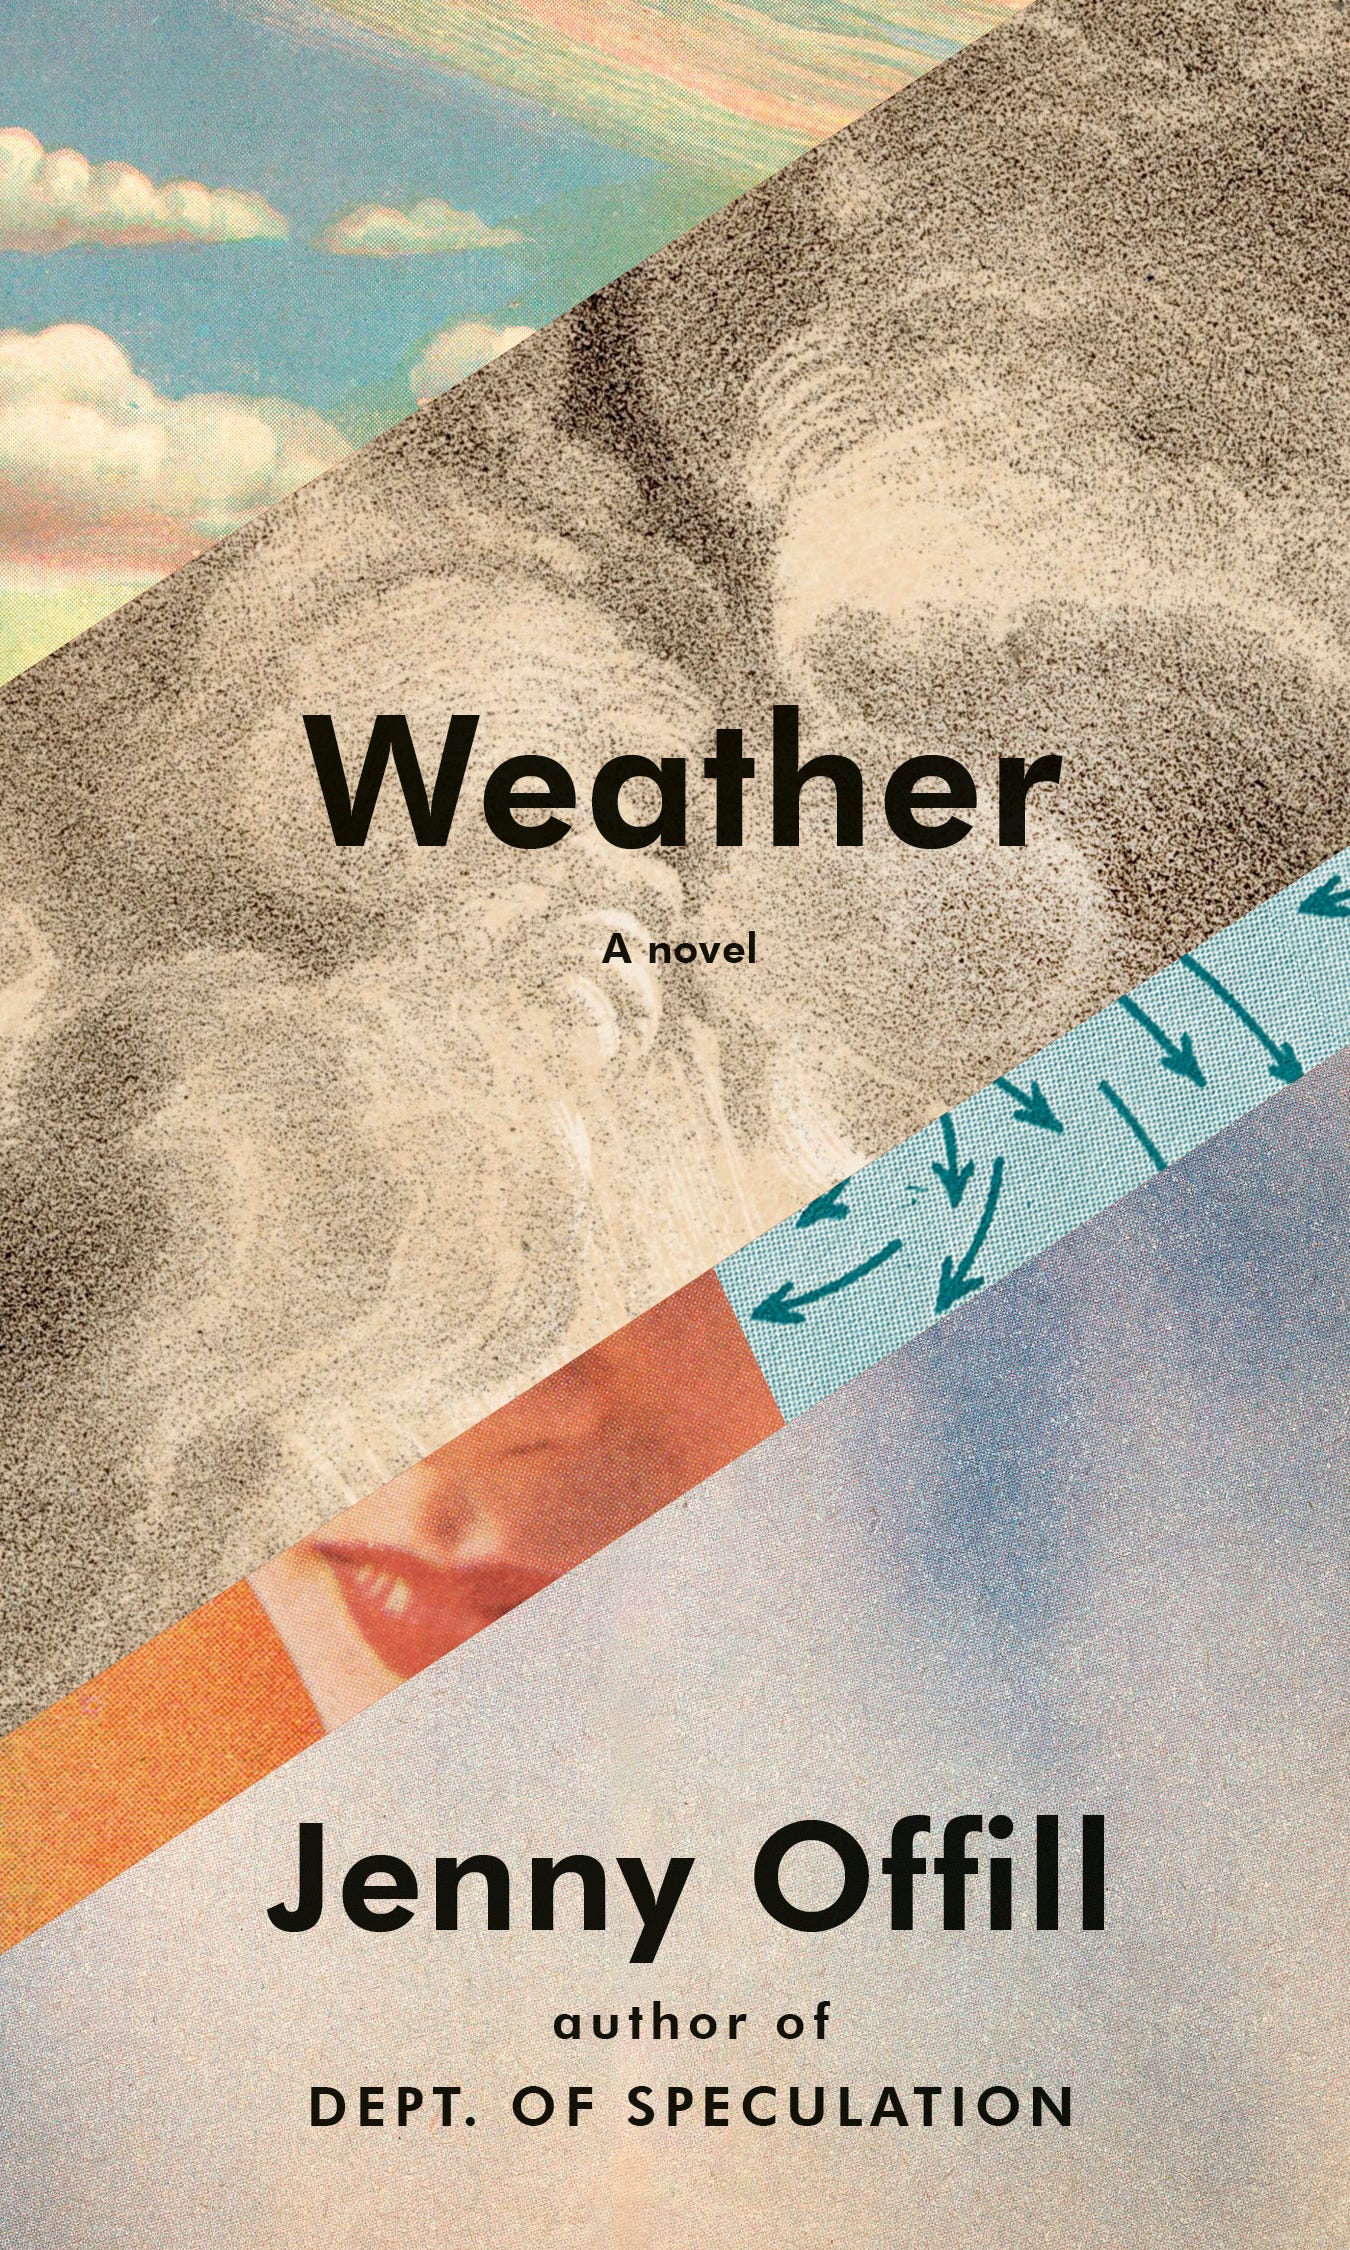 Weather by Jenny Offill | Goodreads